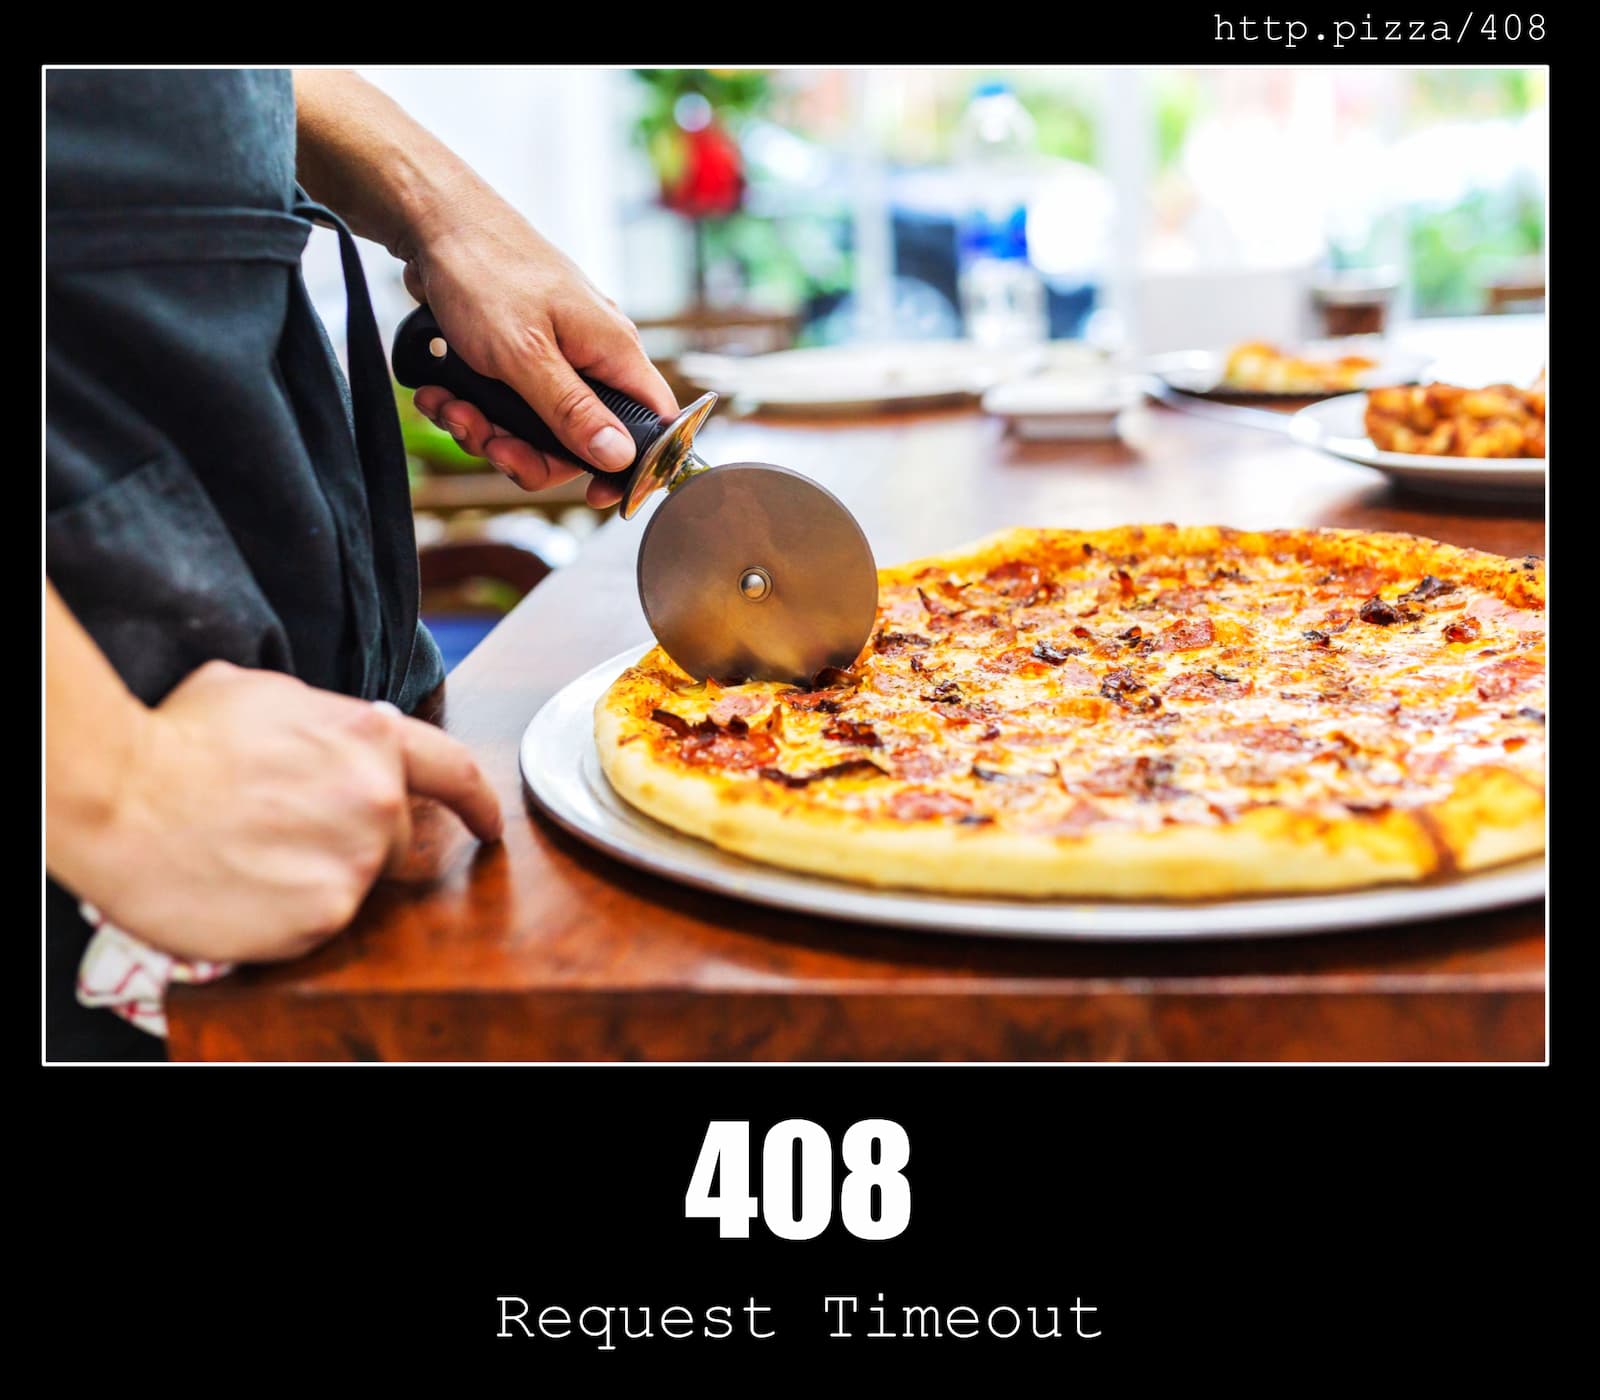 HTTP Status Code 408 Request Timeout & Pizzas